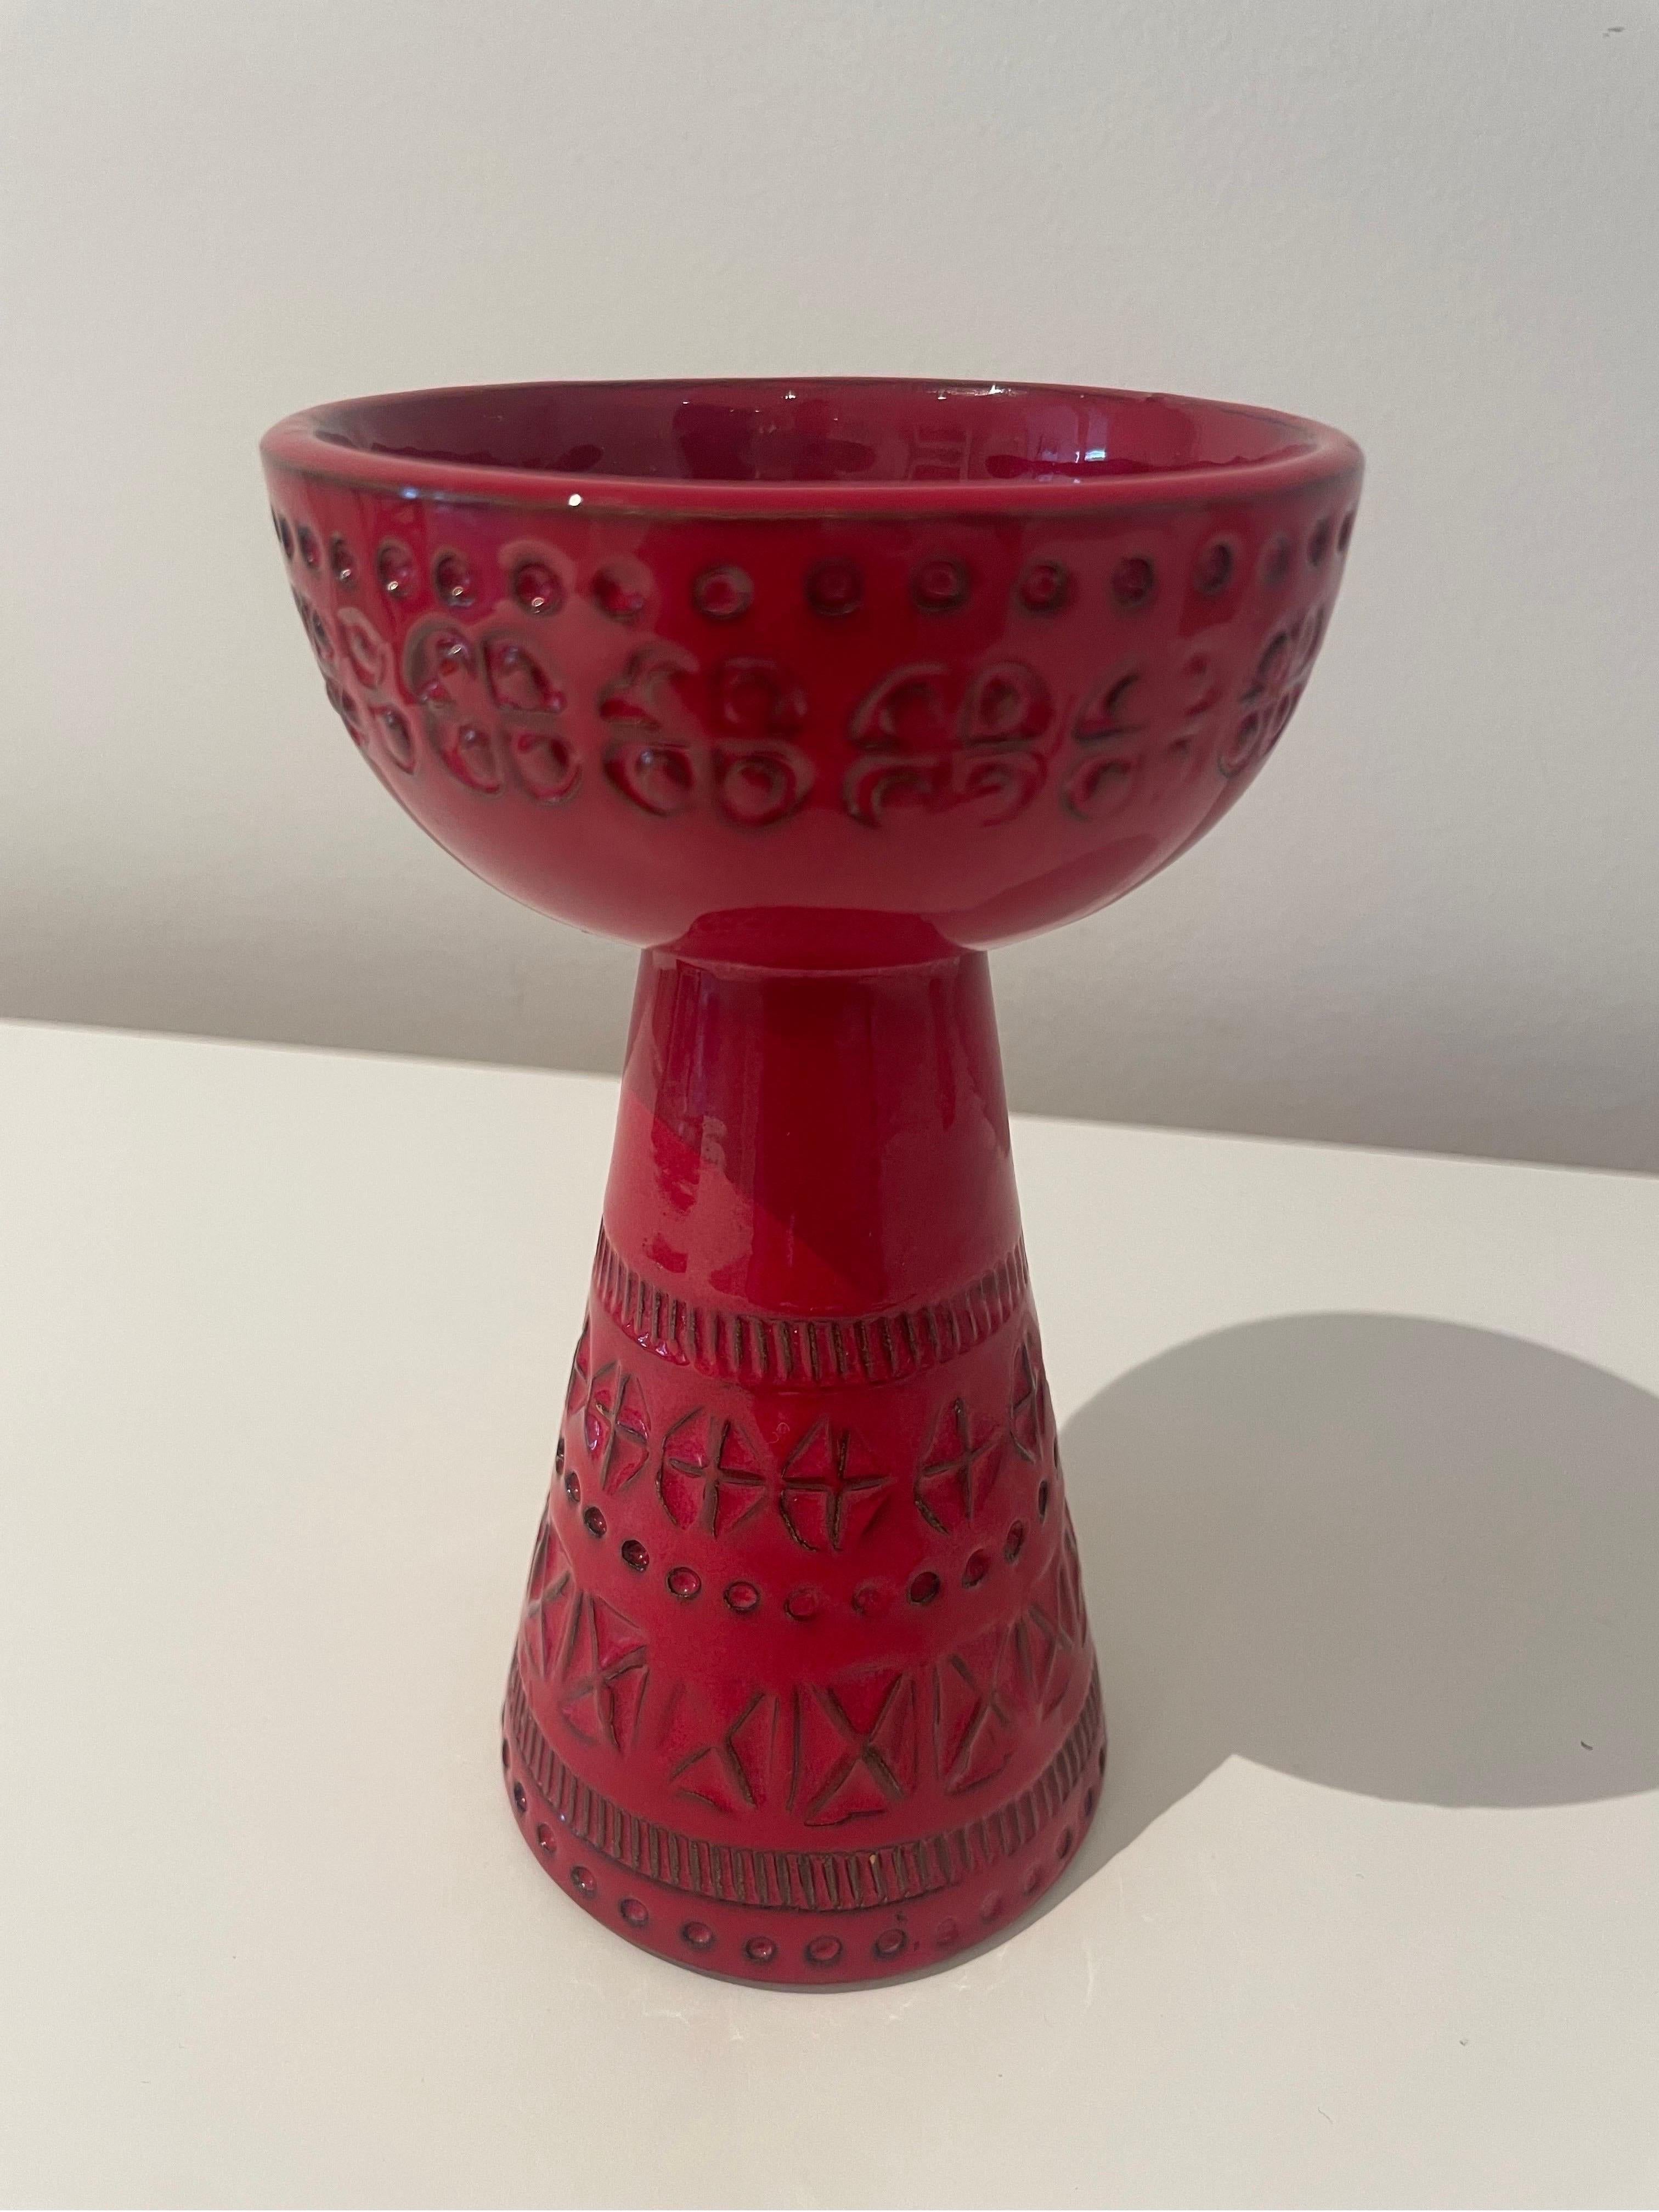 Great candle holder/ vase from Bitossi in ceramic. Beautiful red glaze color made with several layers of glaze in different tones and hand-carved patterns that create a lovely irregular structure